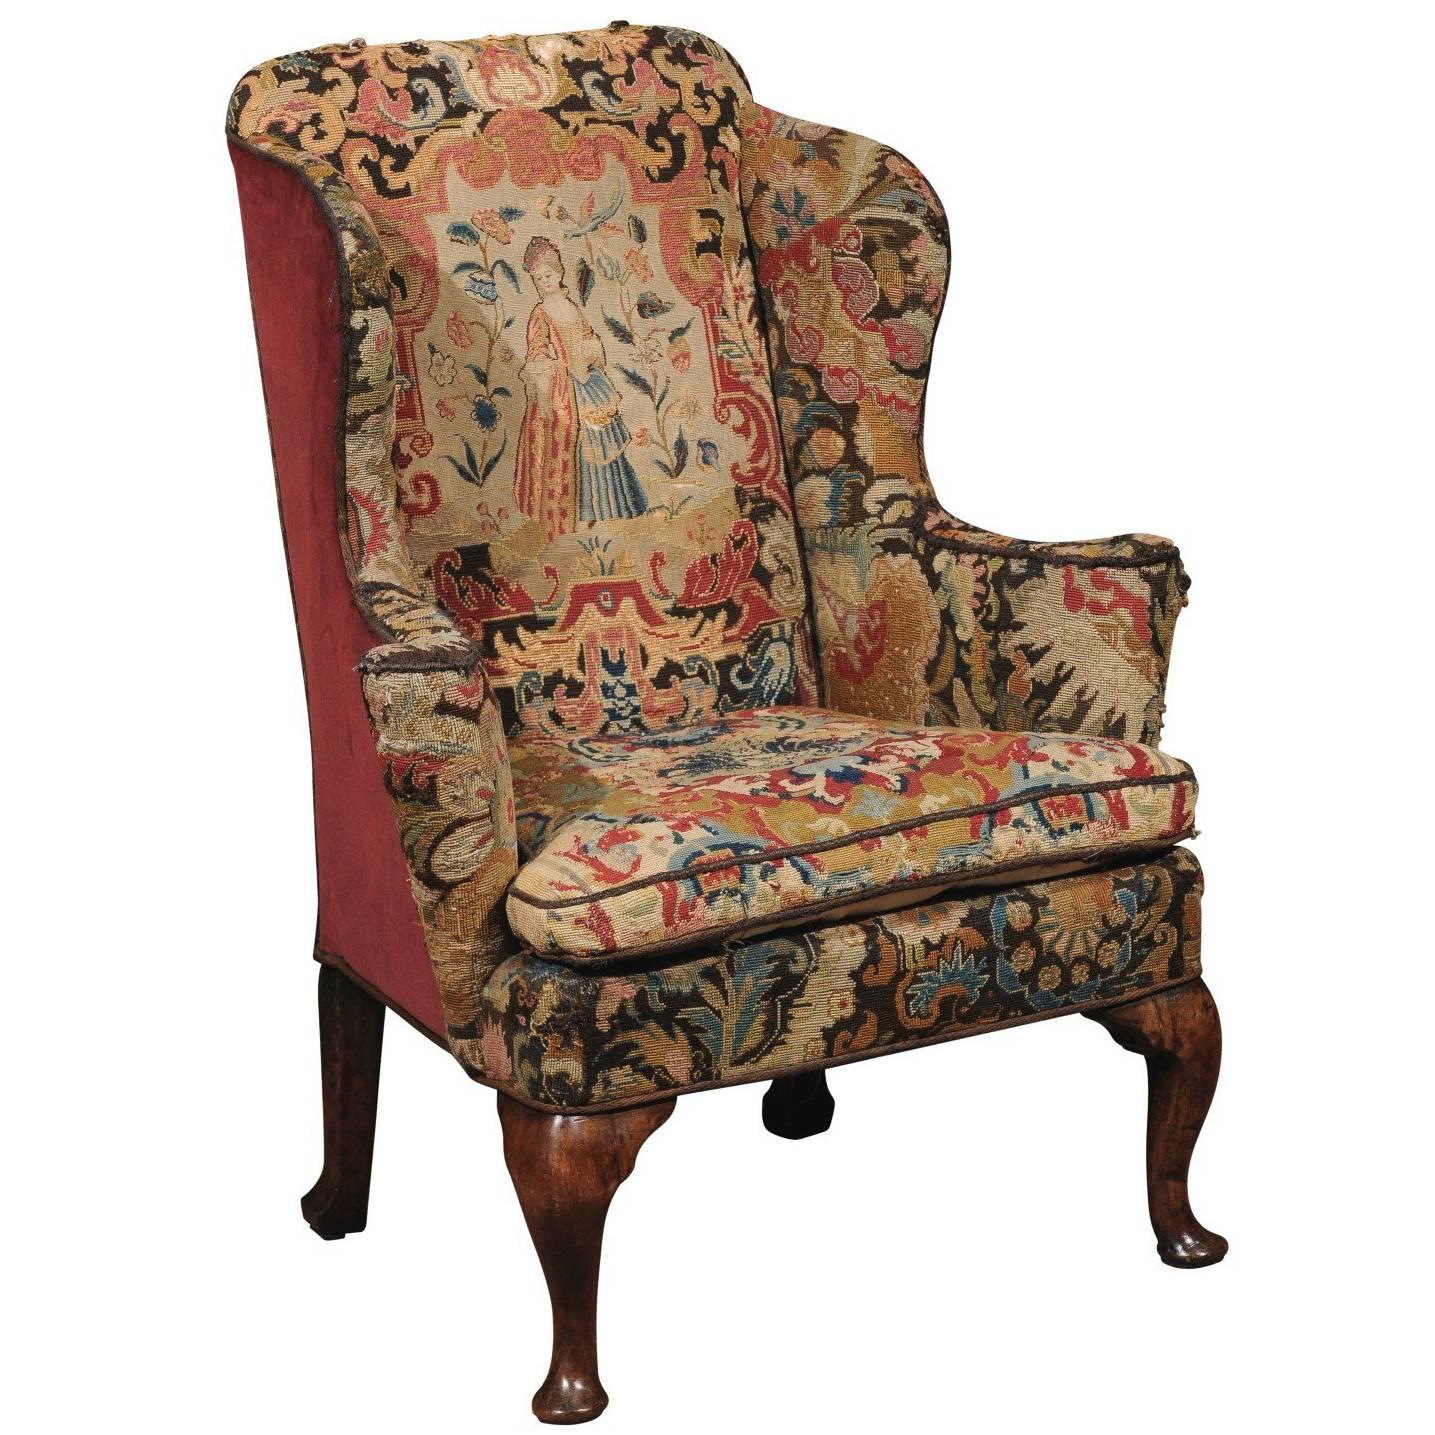 18th Century English Queen Anne Wing Chair in Walnut with Needlepoint Tapestry